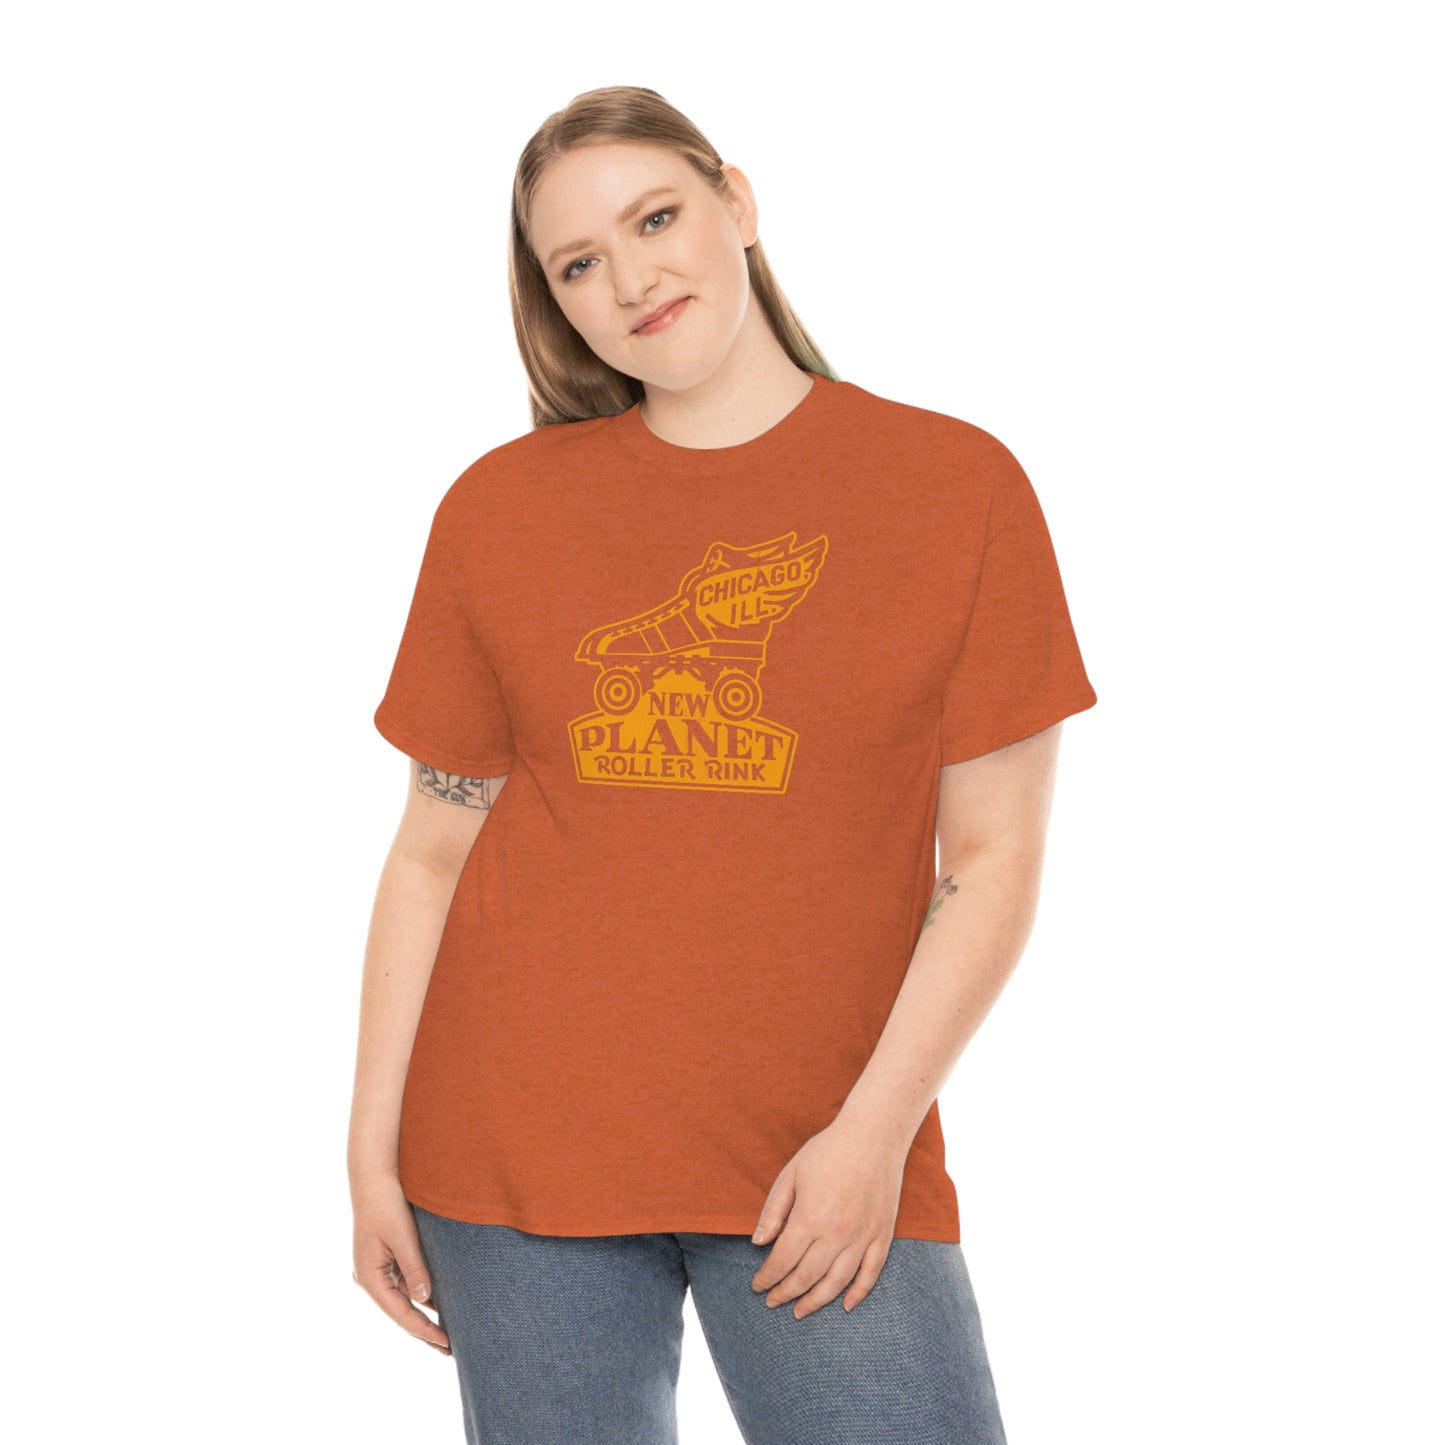 New Planet Roller Rink T-Shirt